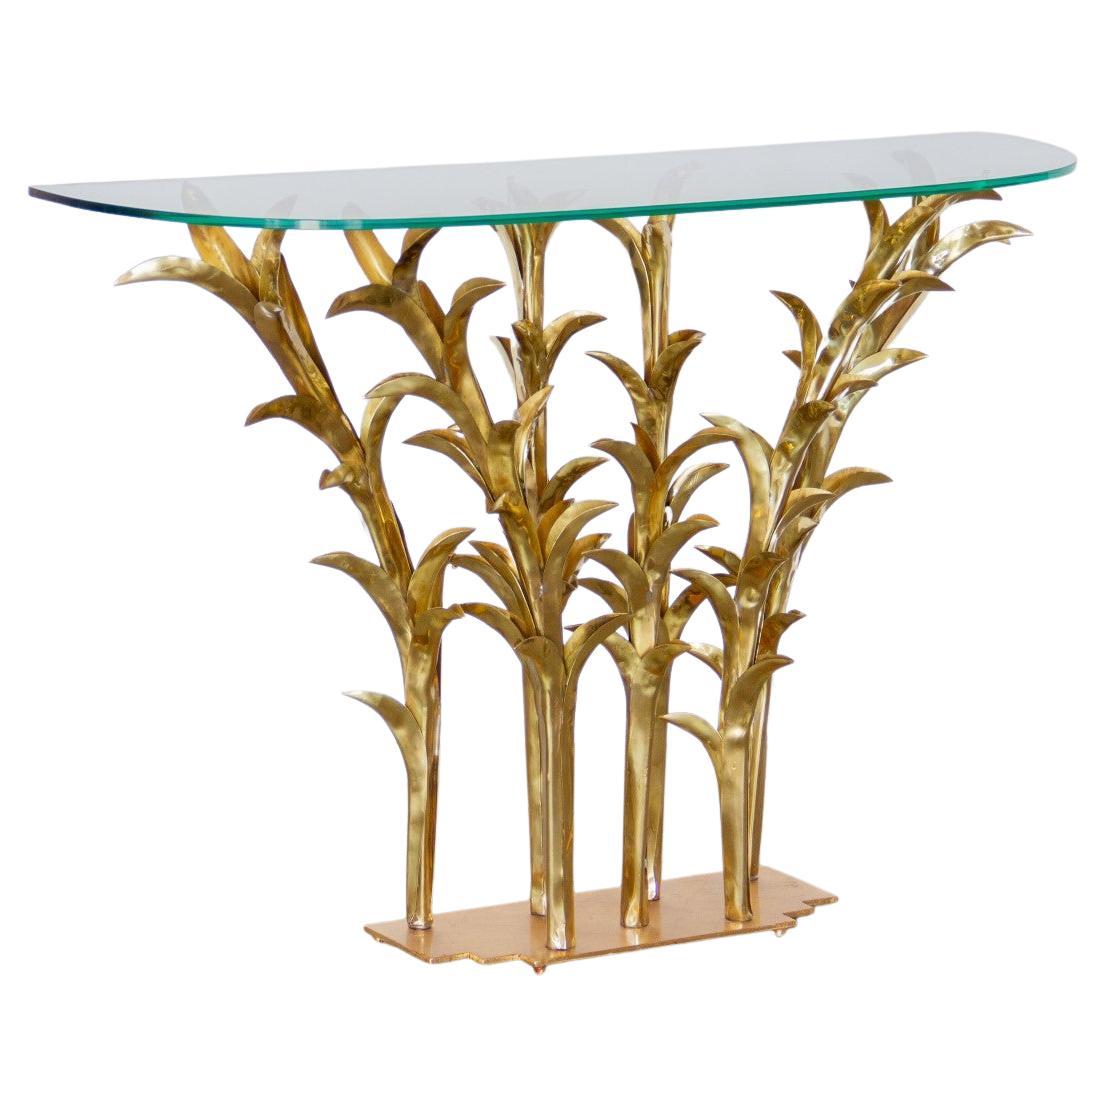 Sculptural Console Table by Alain Chervet, 1992 Titled 'Madere' For Sale